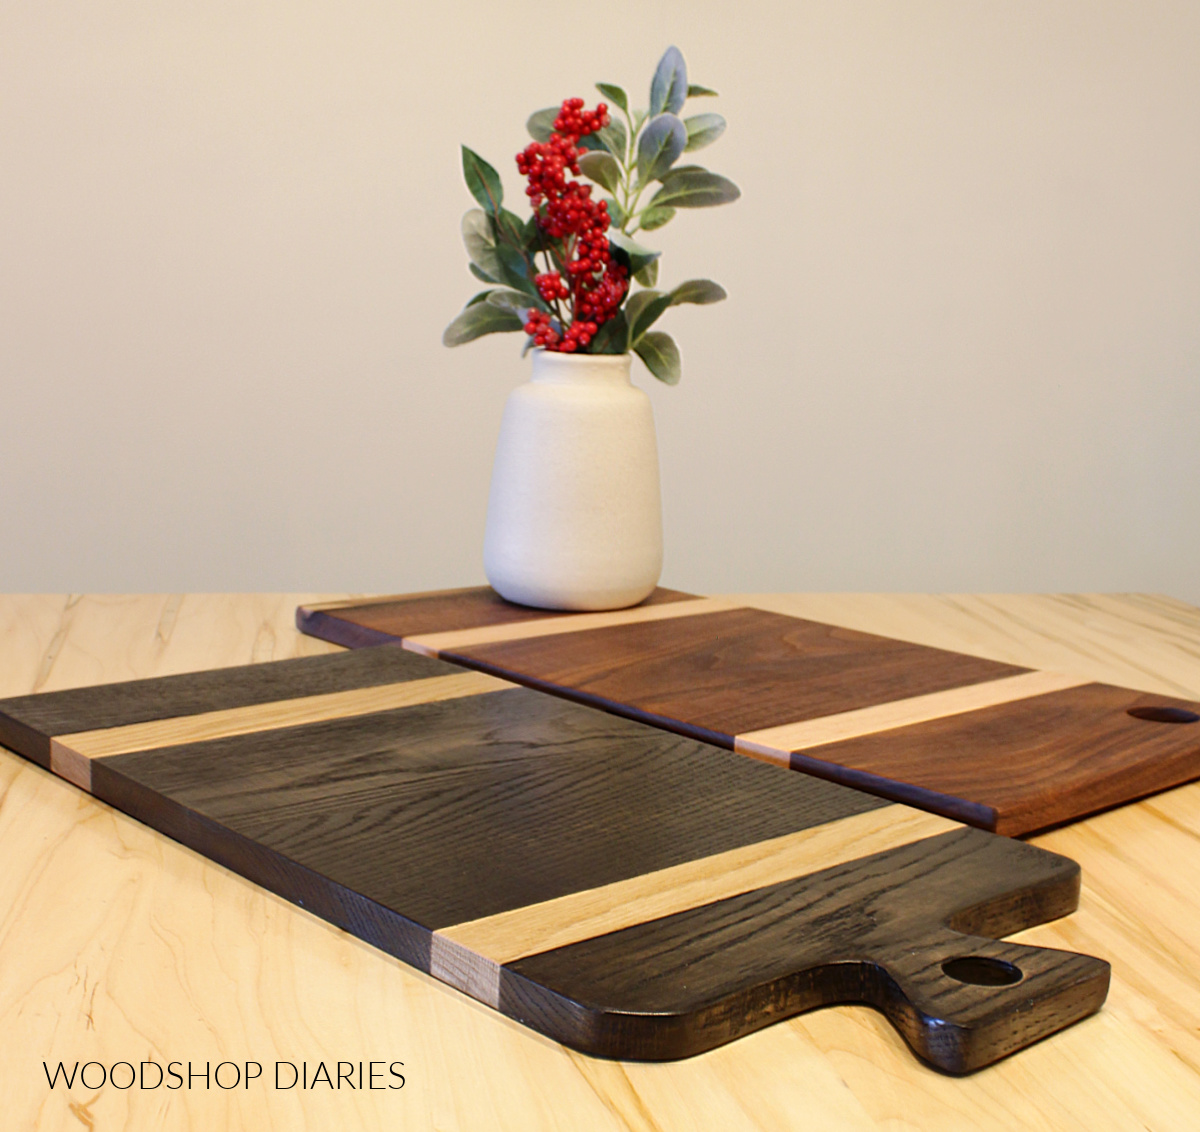 https://www.woodshopdiaries.com/wp-content/uploads/2022/11/DIY-Two-Tone-Cutting-Boards.jpg